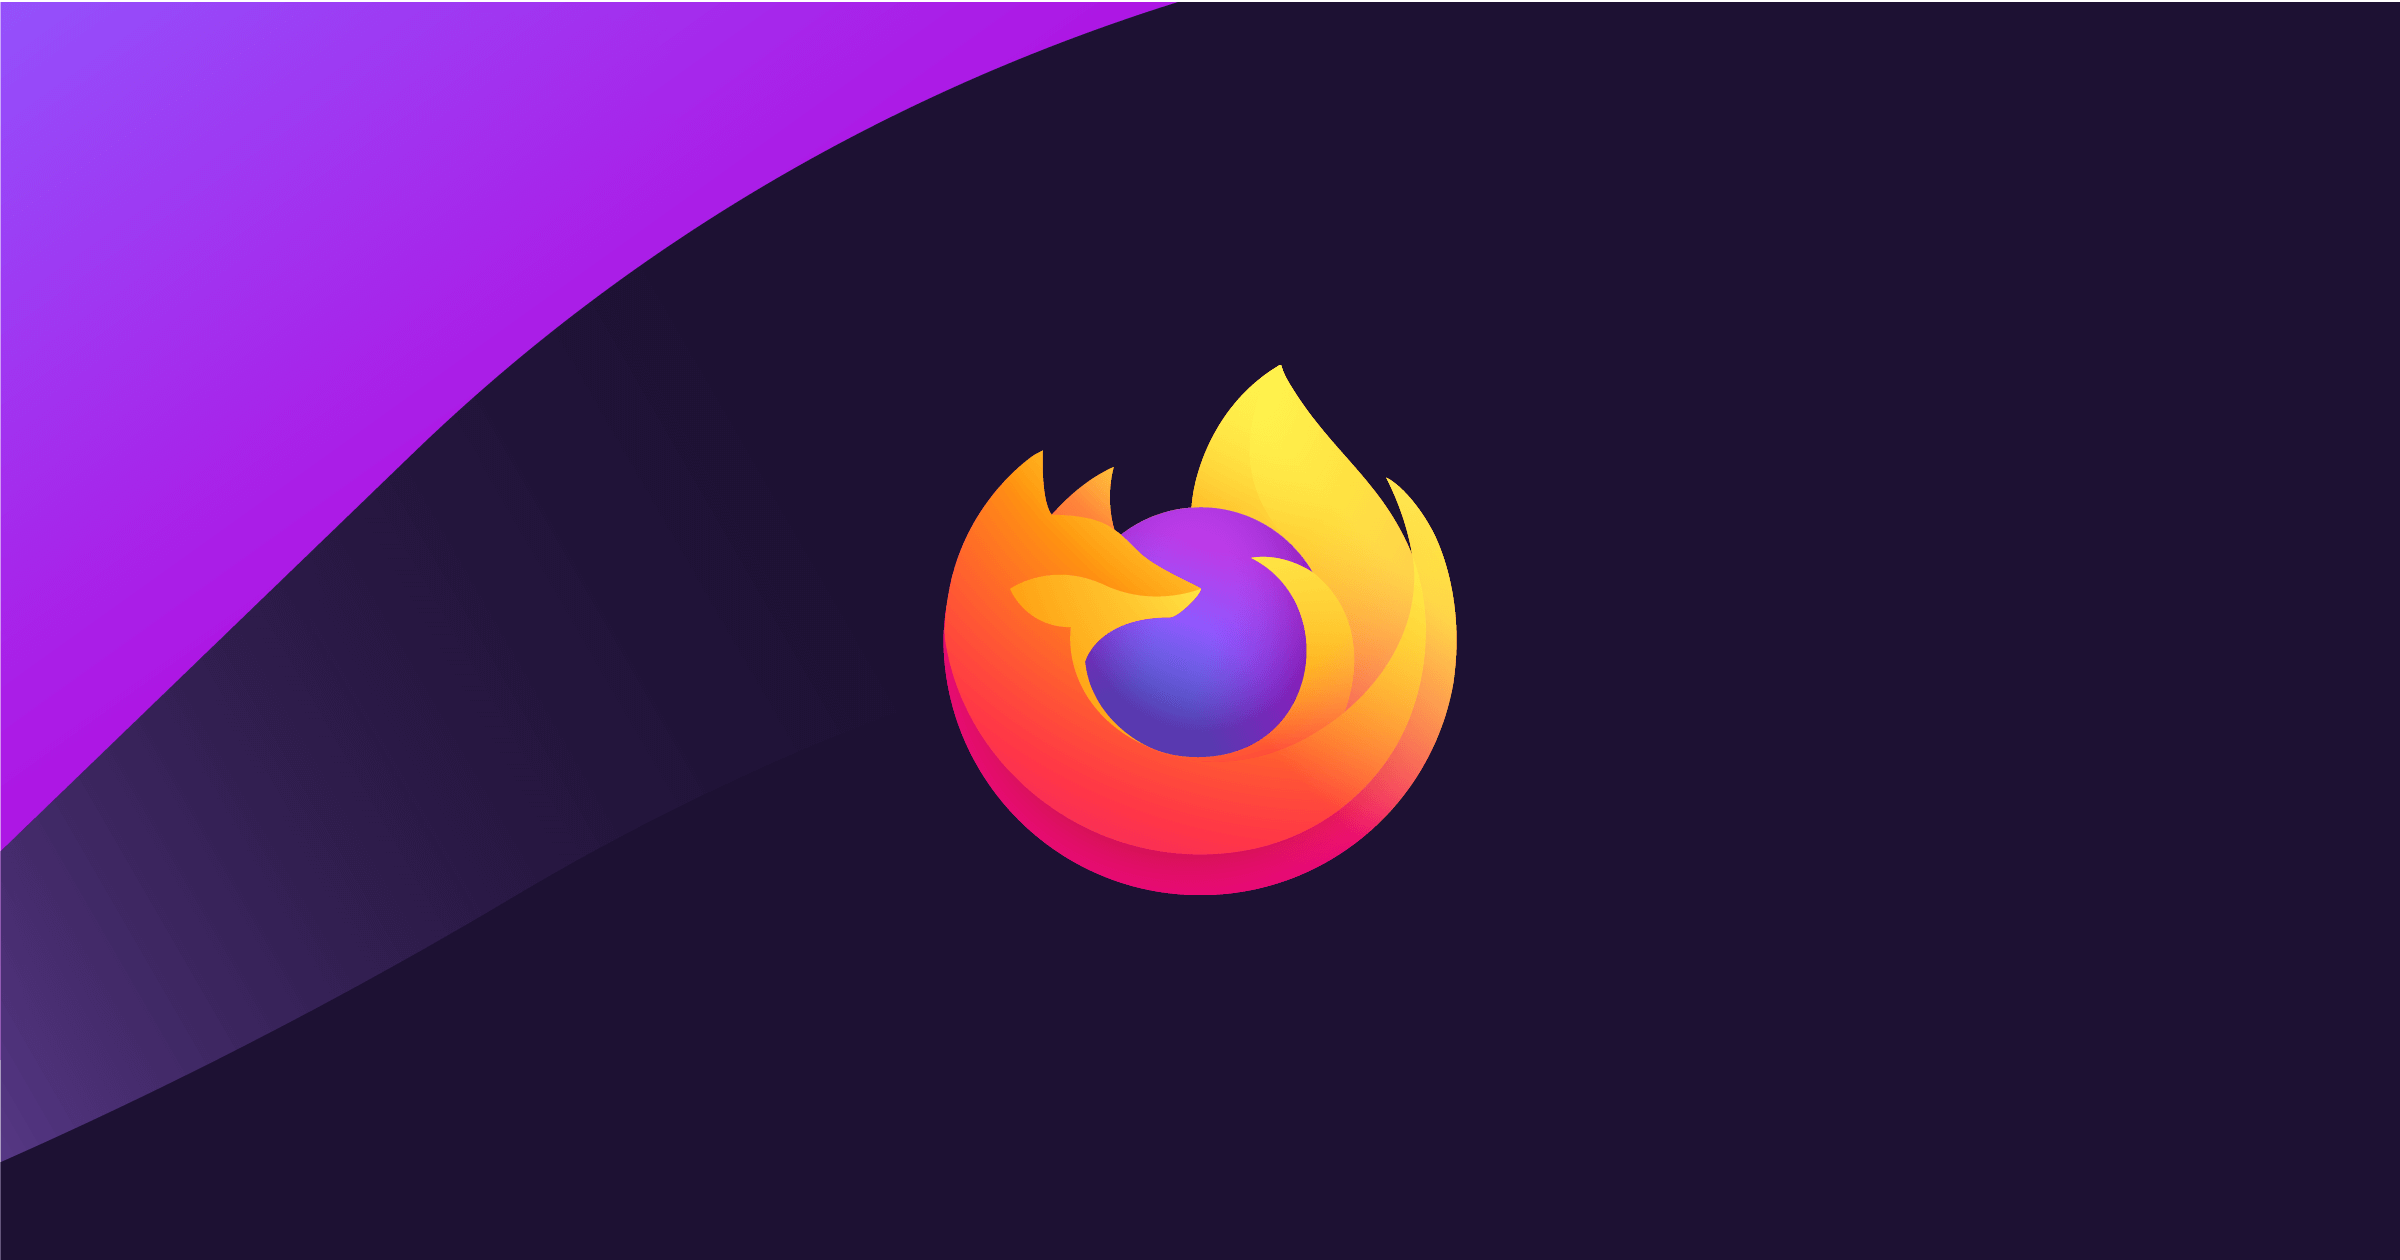 Firefox vs. Chrome: Which is better? - Mozilla